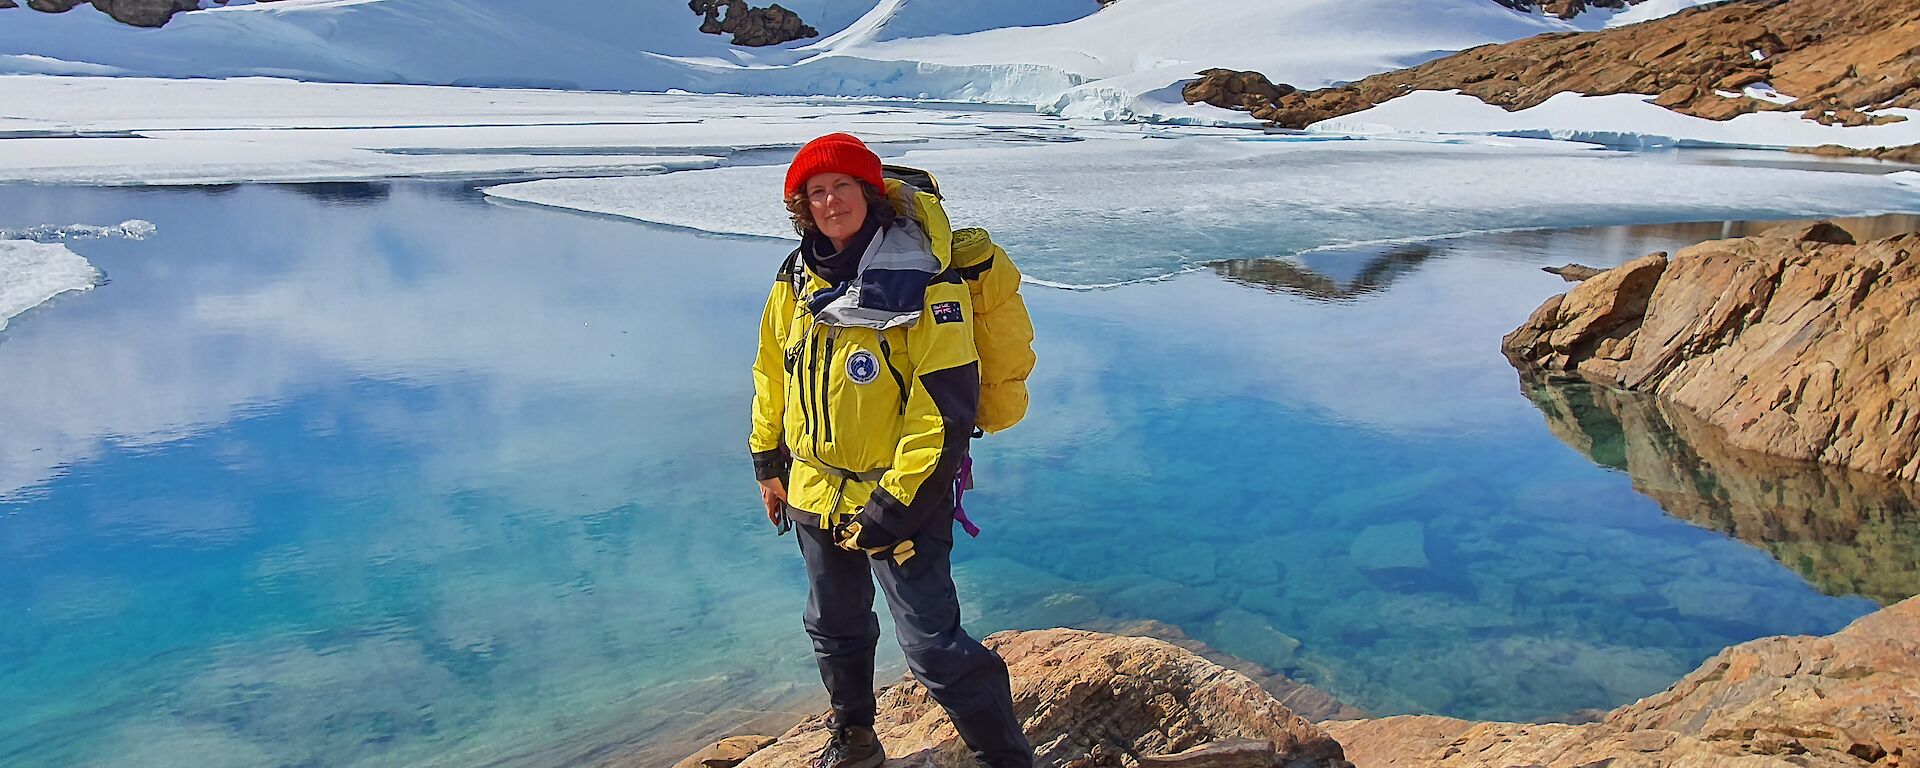 A woman in cold weather gear standing in front of a beautiful blue icy lake